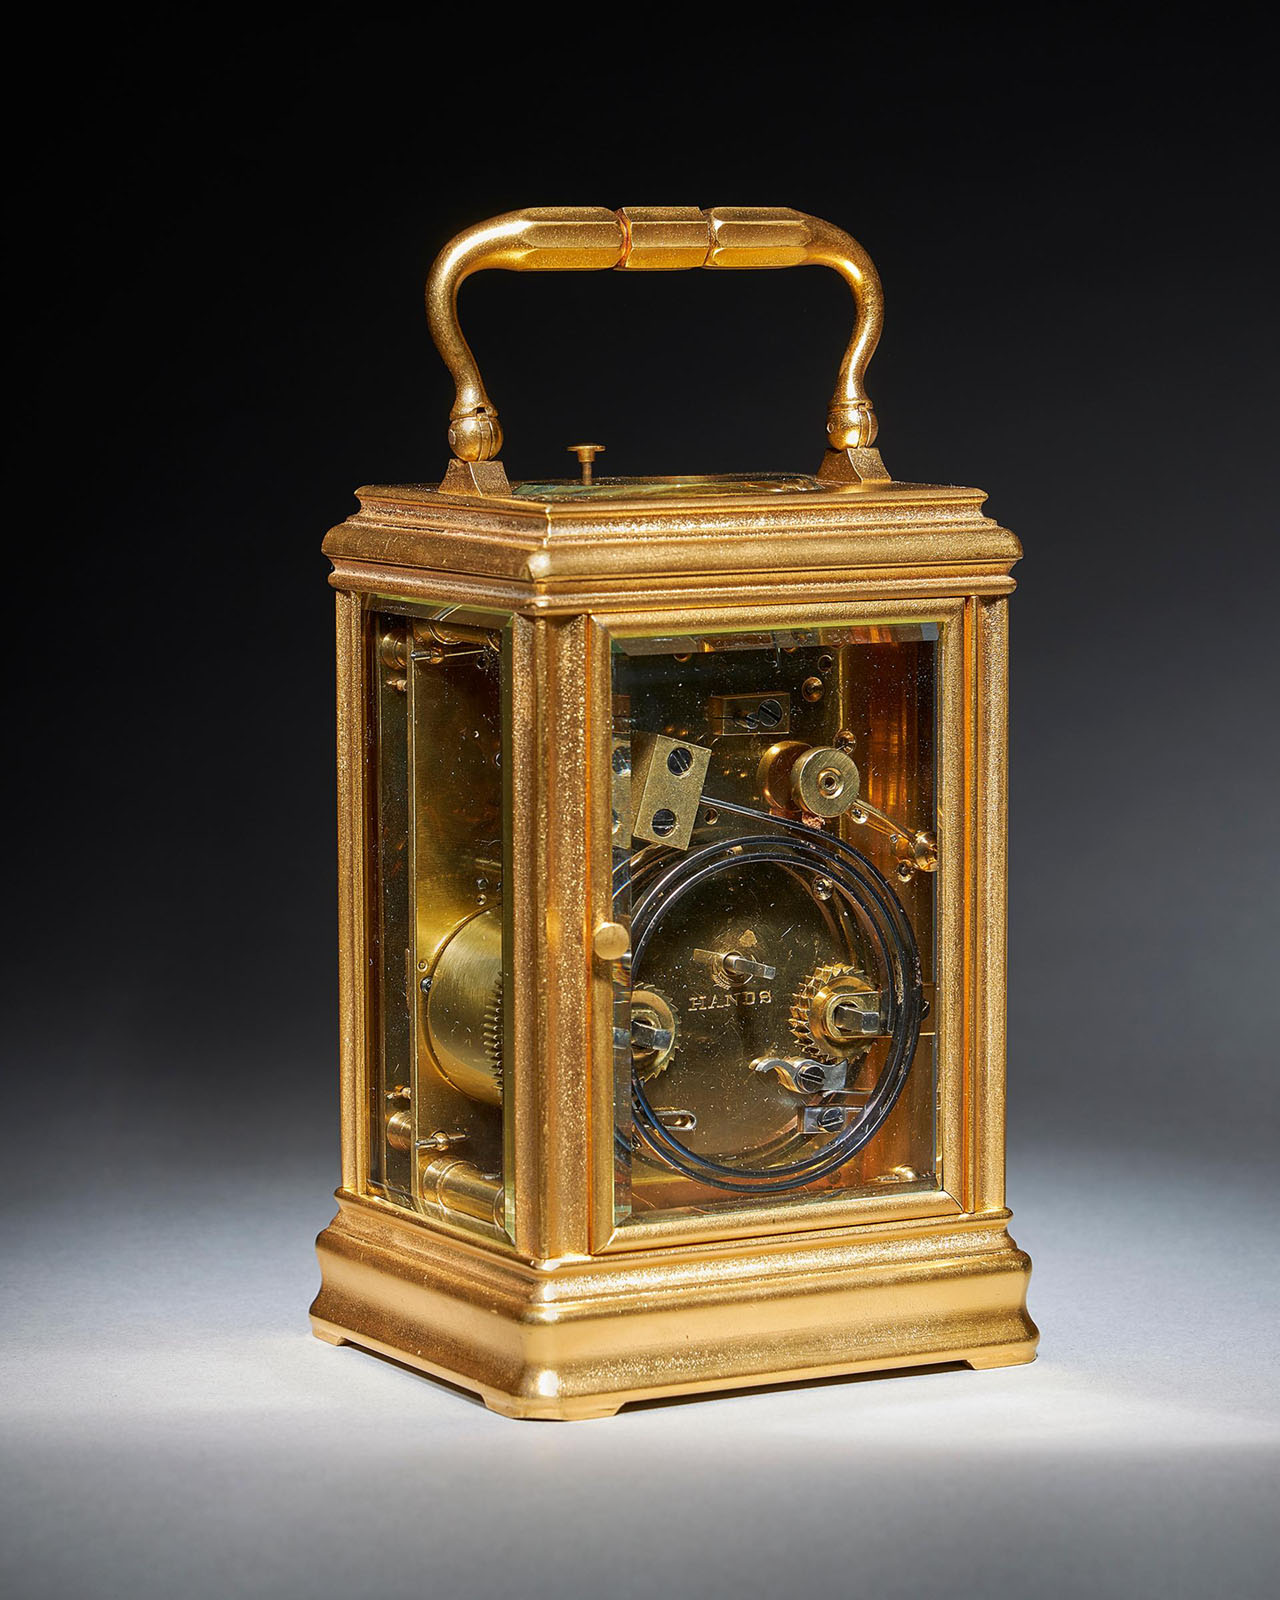 19th Century Repeating Gilt-Brass Carriage Clock by the Famous Drocourt 3